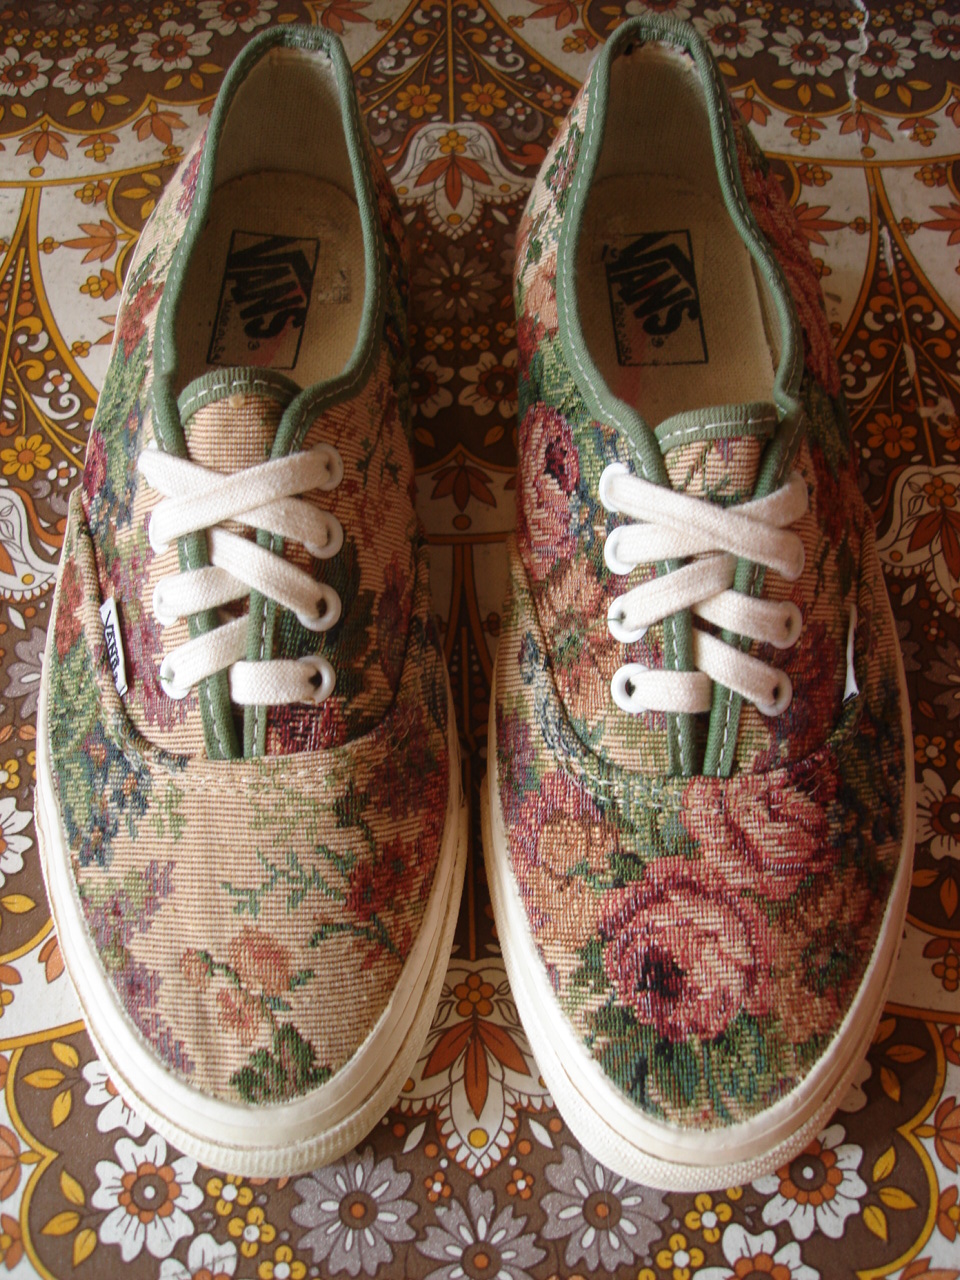 theothersideofthepillow: vintage VANS shoes FLORAL TEA TAPESTRY style ...